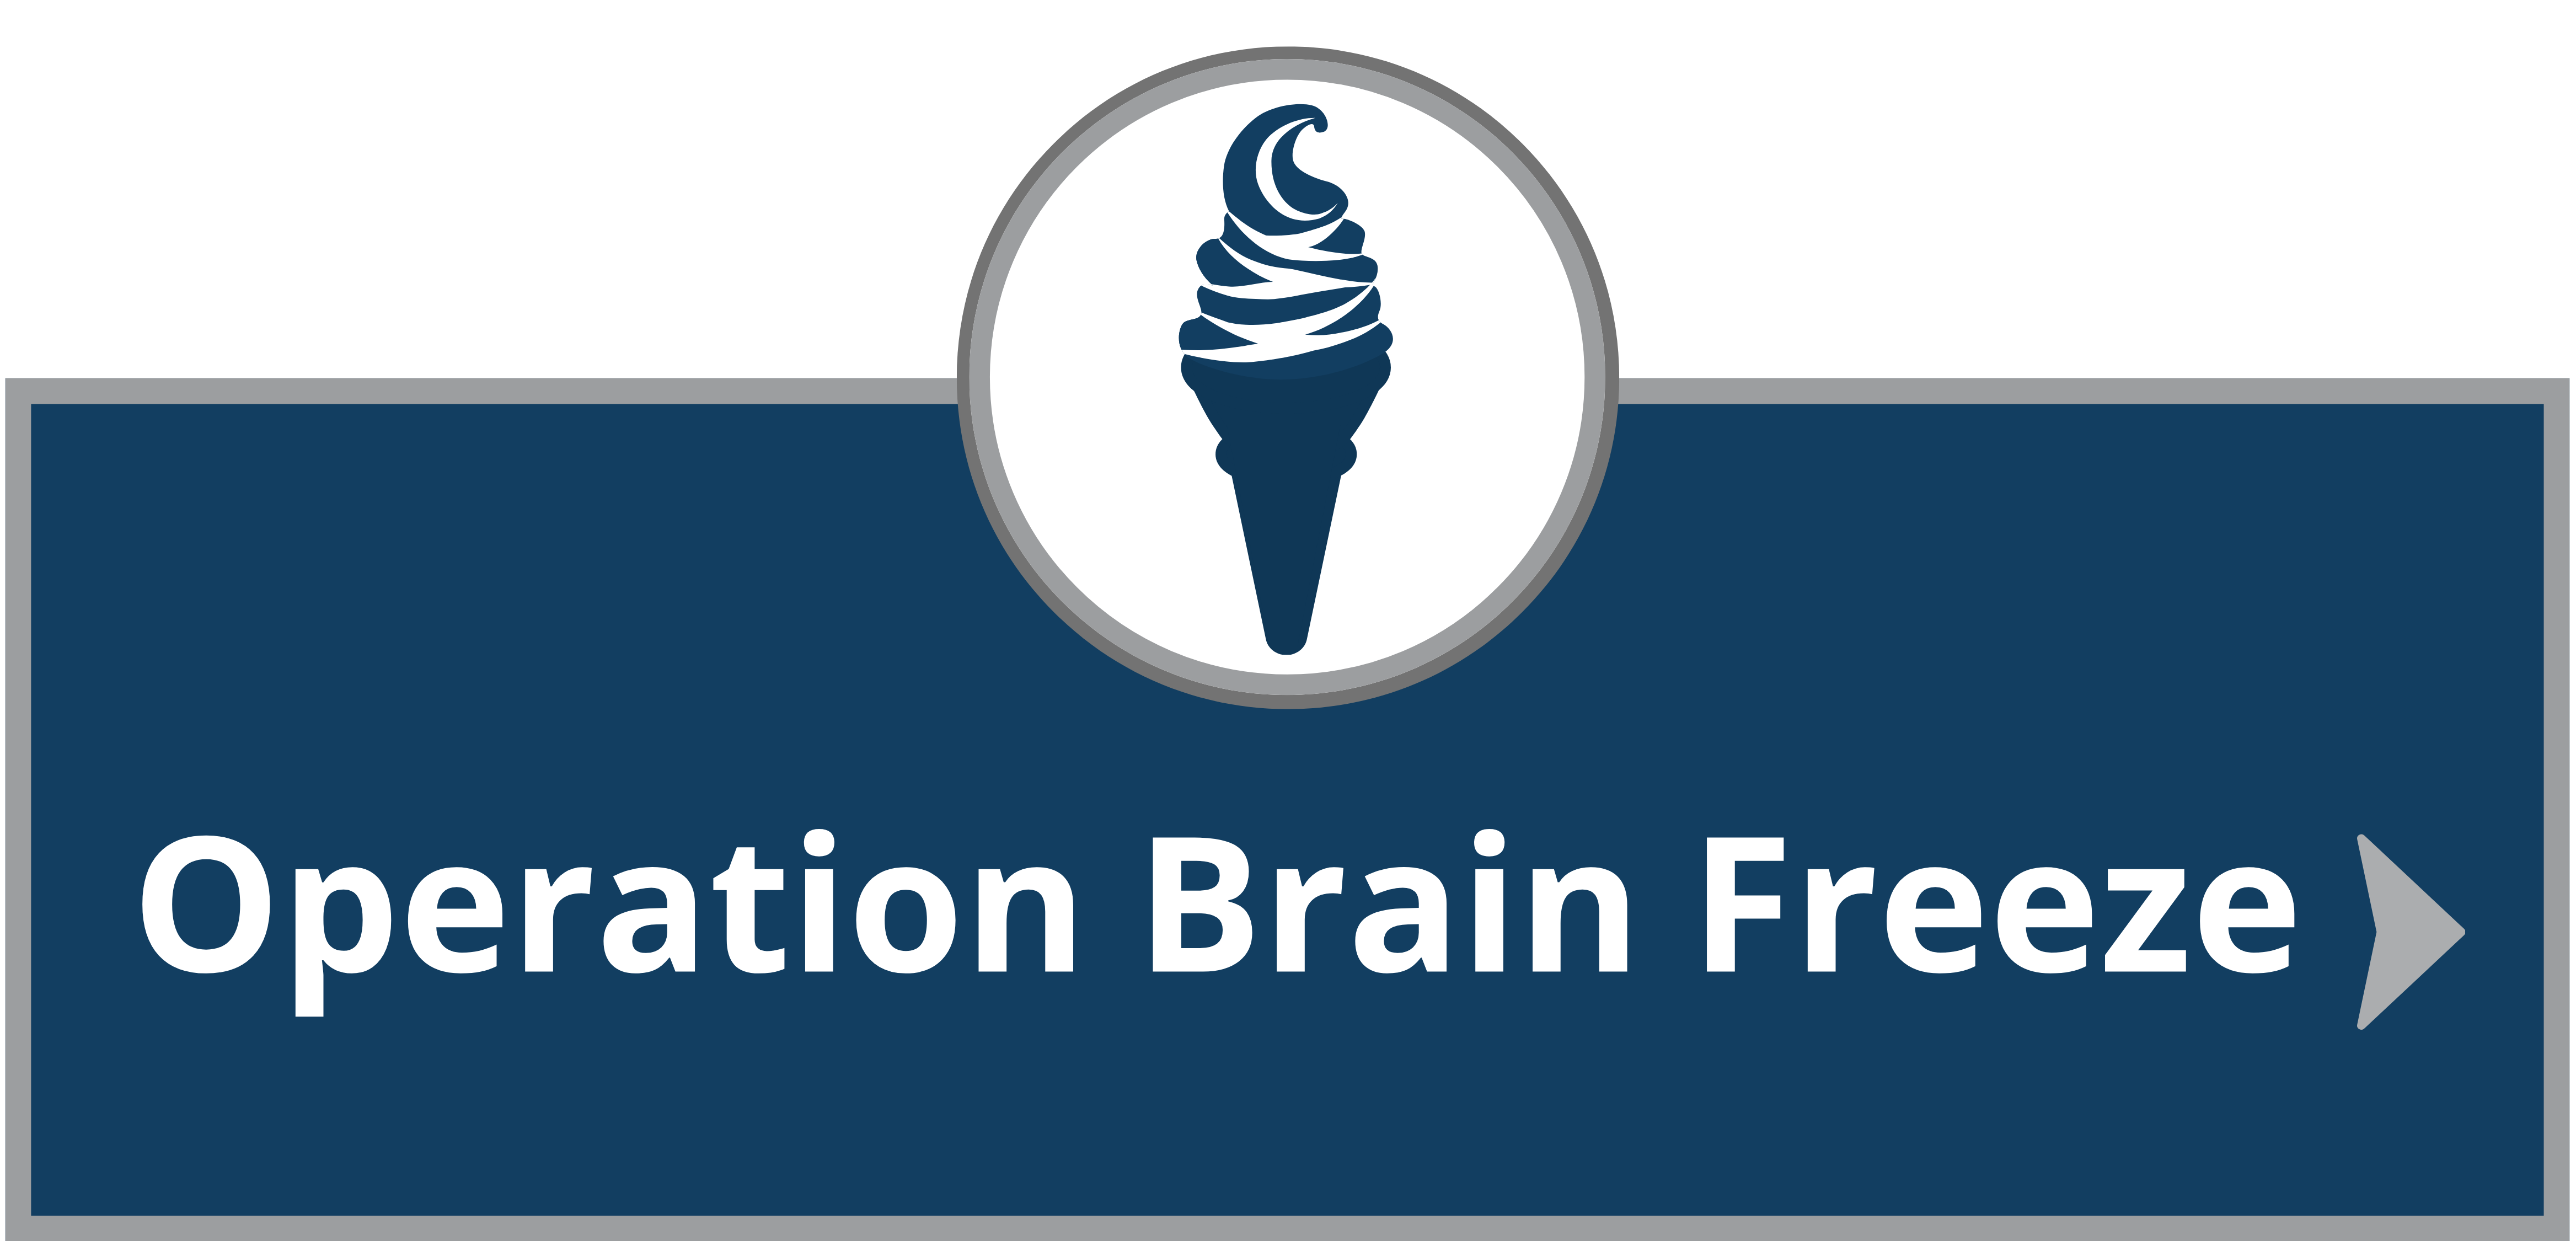 Click here for Operation Brain Freeze Information